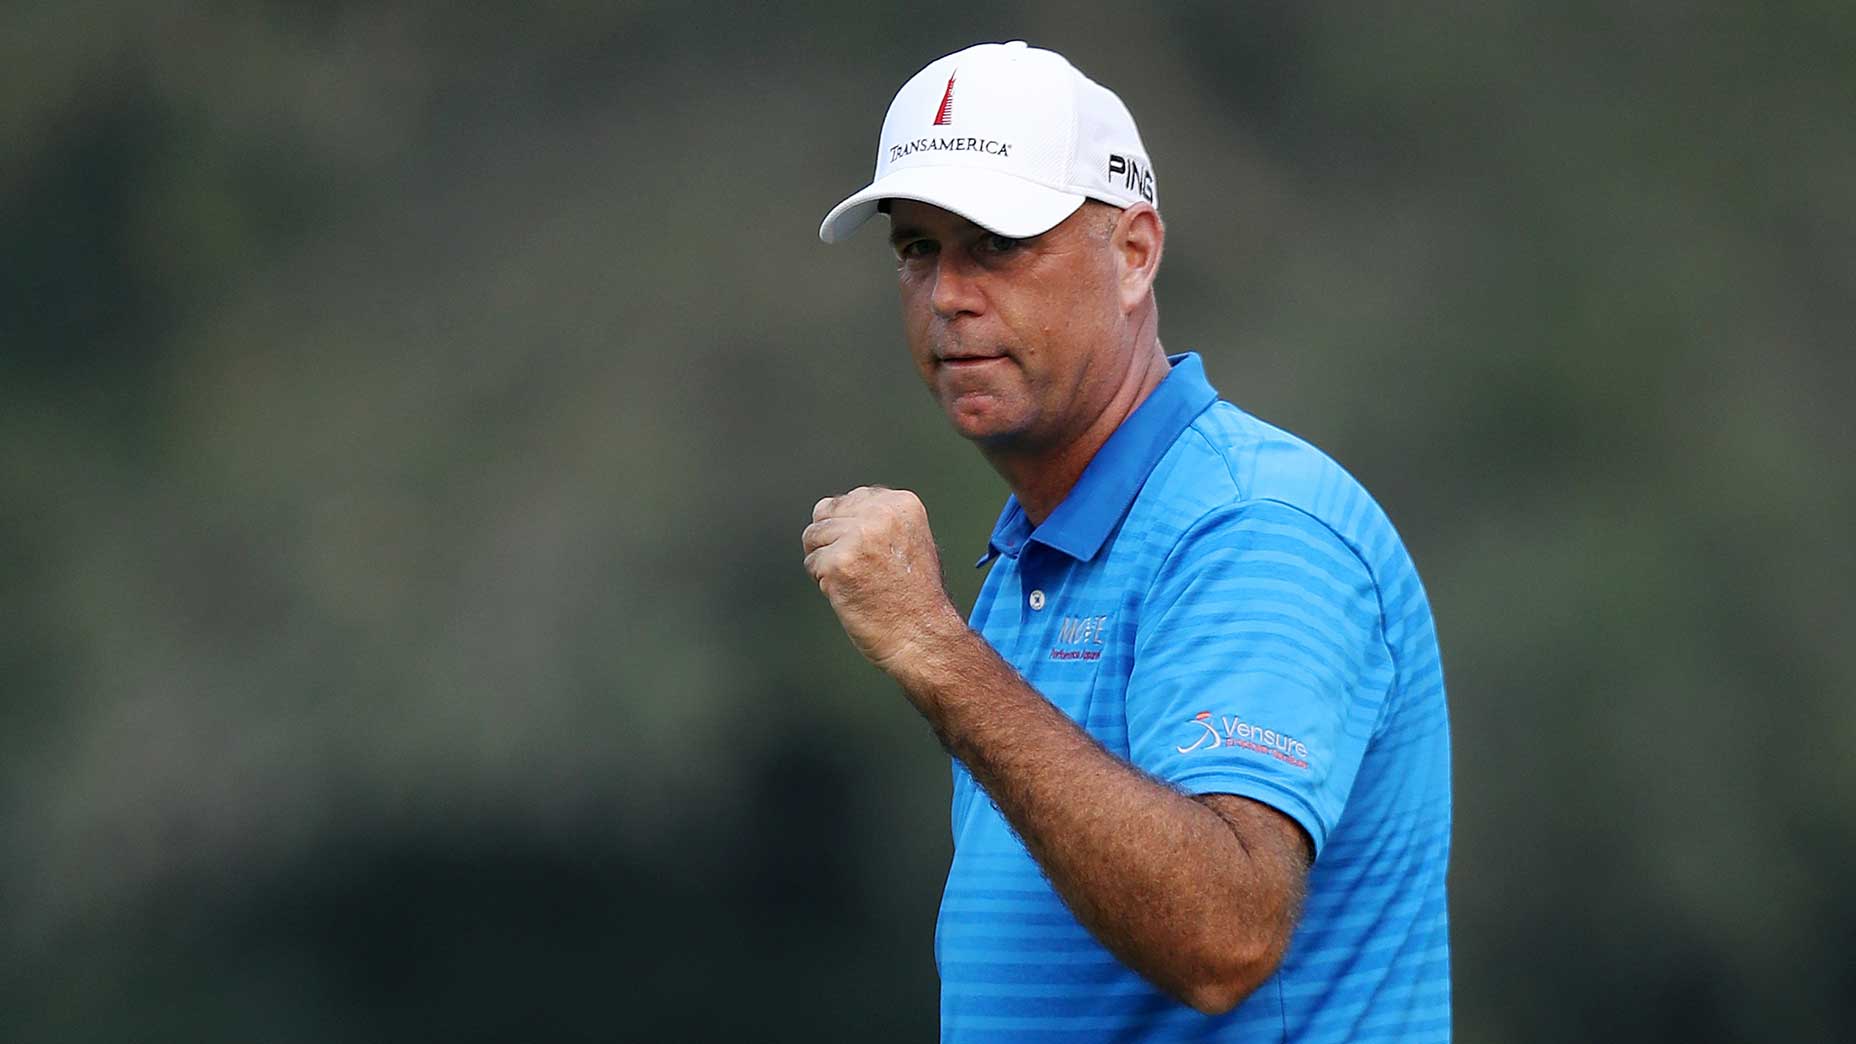 Stewart Cink is a winner once again on the PGA Tour